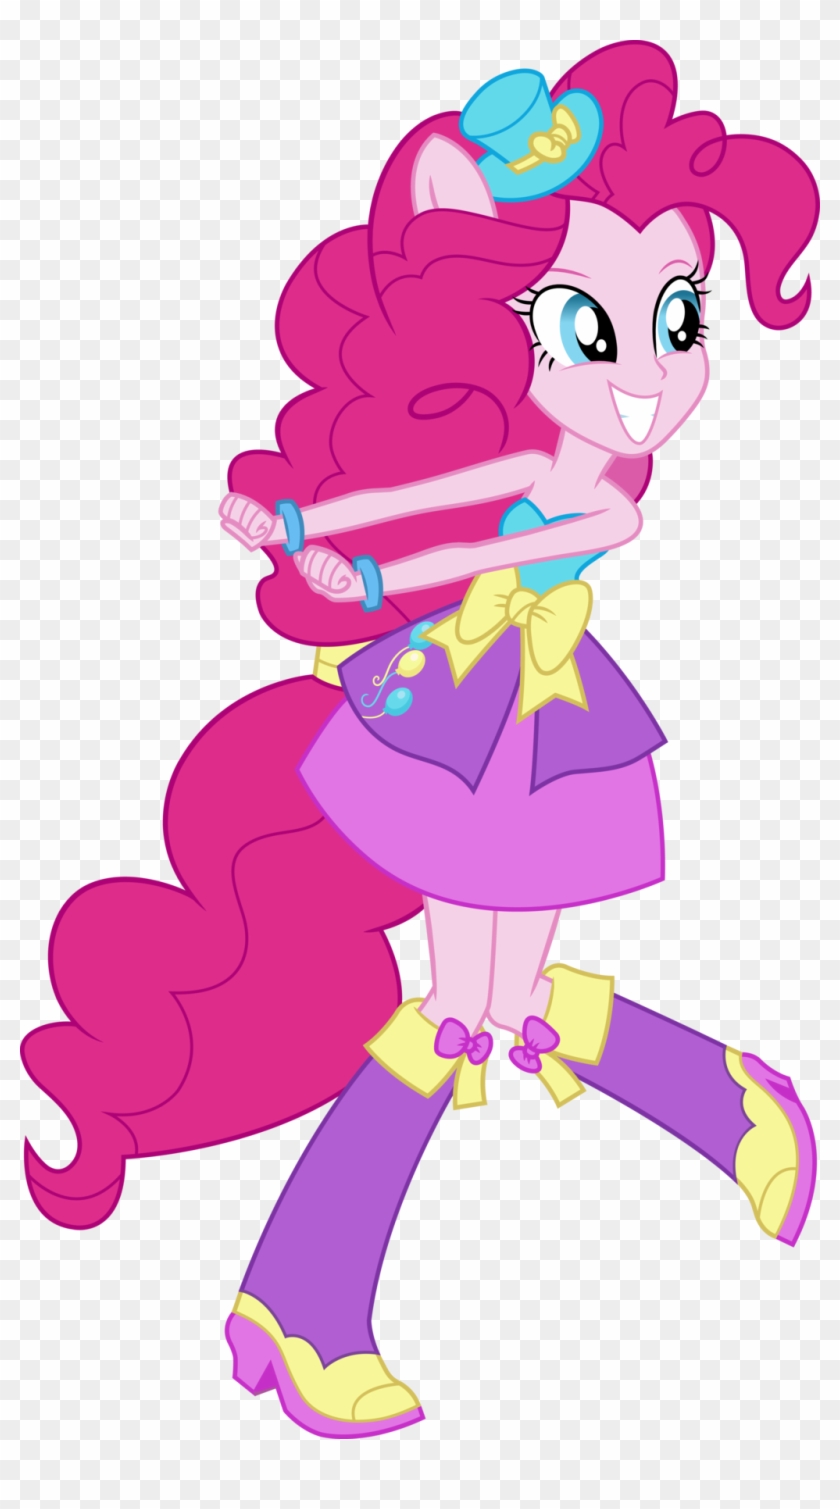 Icantunloveyou Pinkie Pie Dance Vector Update V2 By - My Little Pony Equestria Girl Pinkie Pie #335842